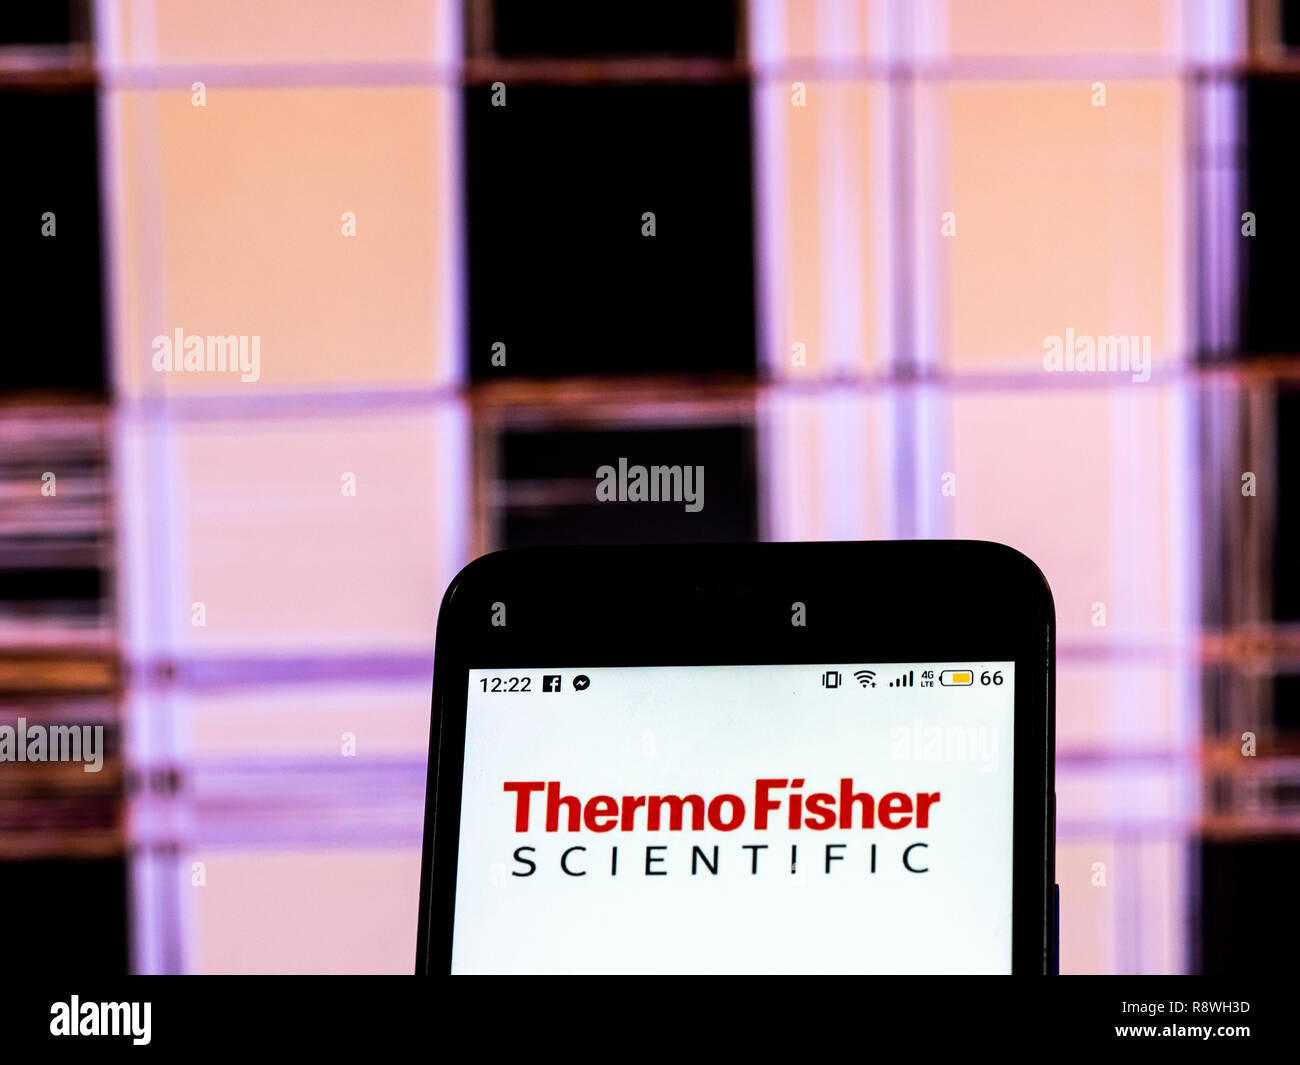 Thermo Fisher Scientific Company logo seen displayed on smart phone Stock  Photo - Alamy